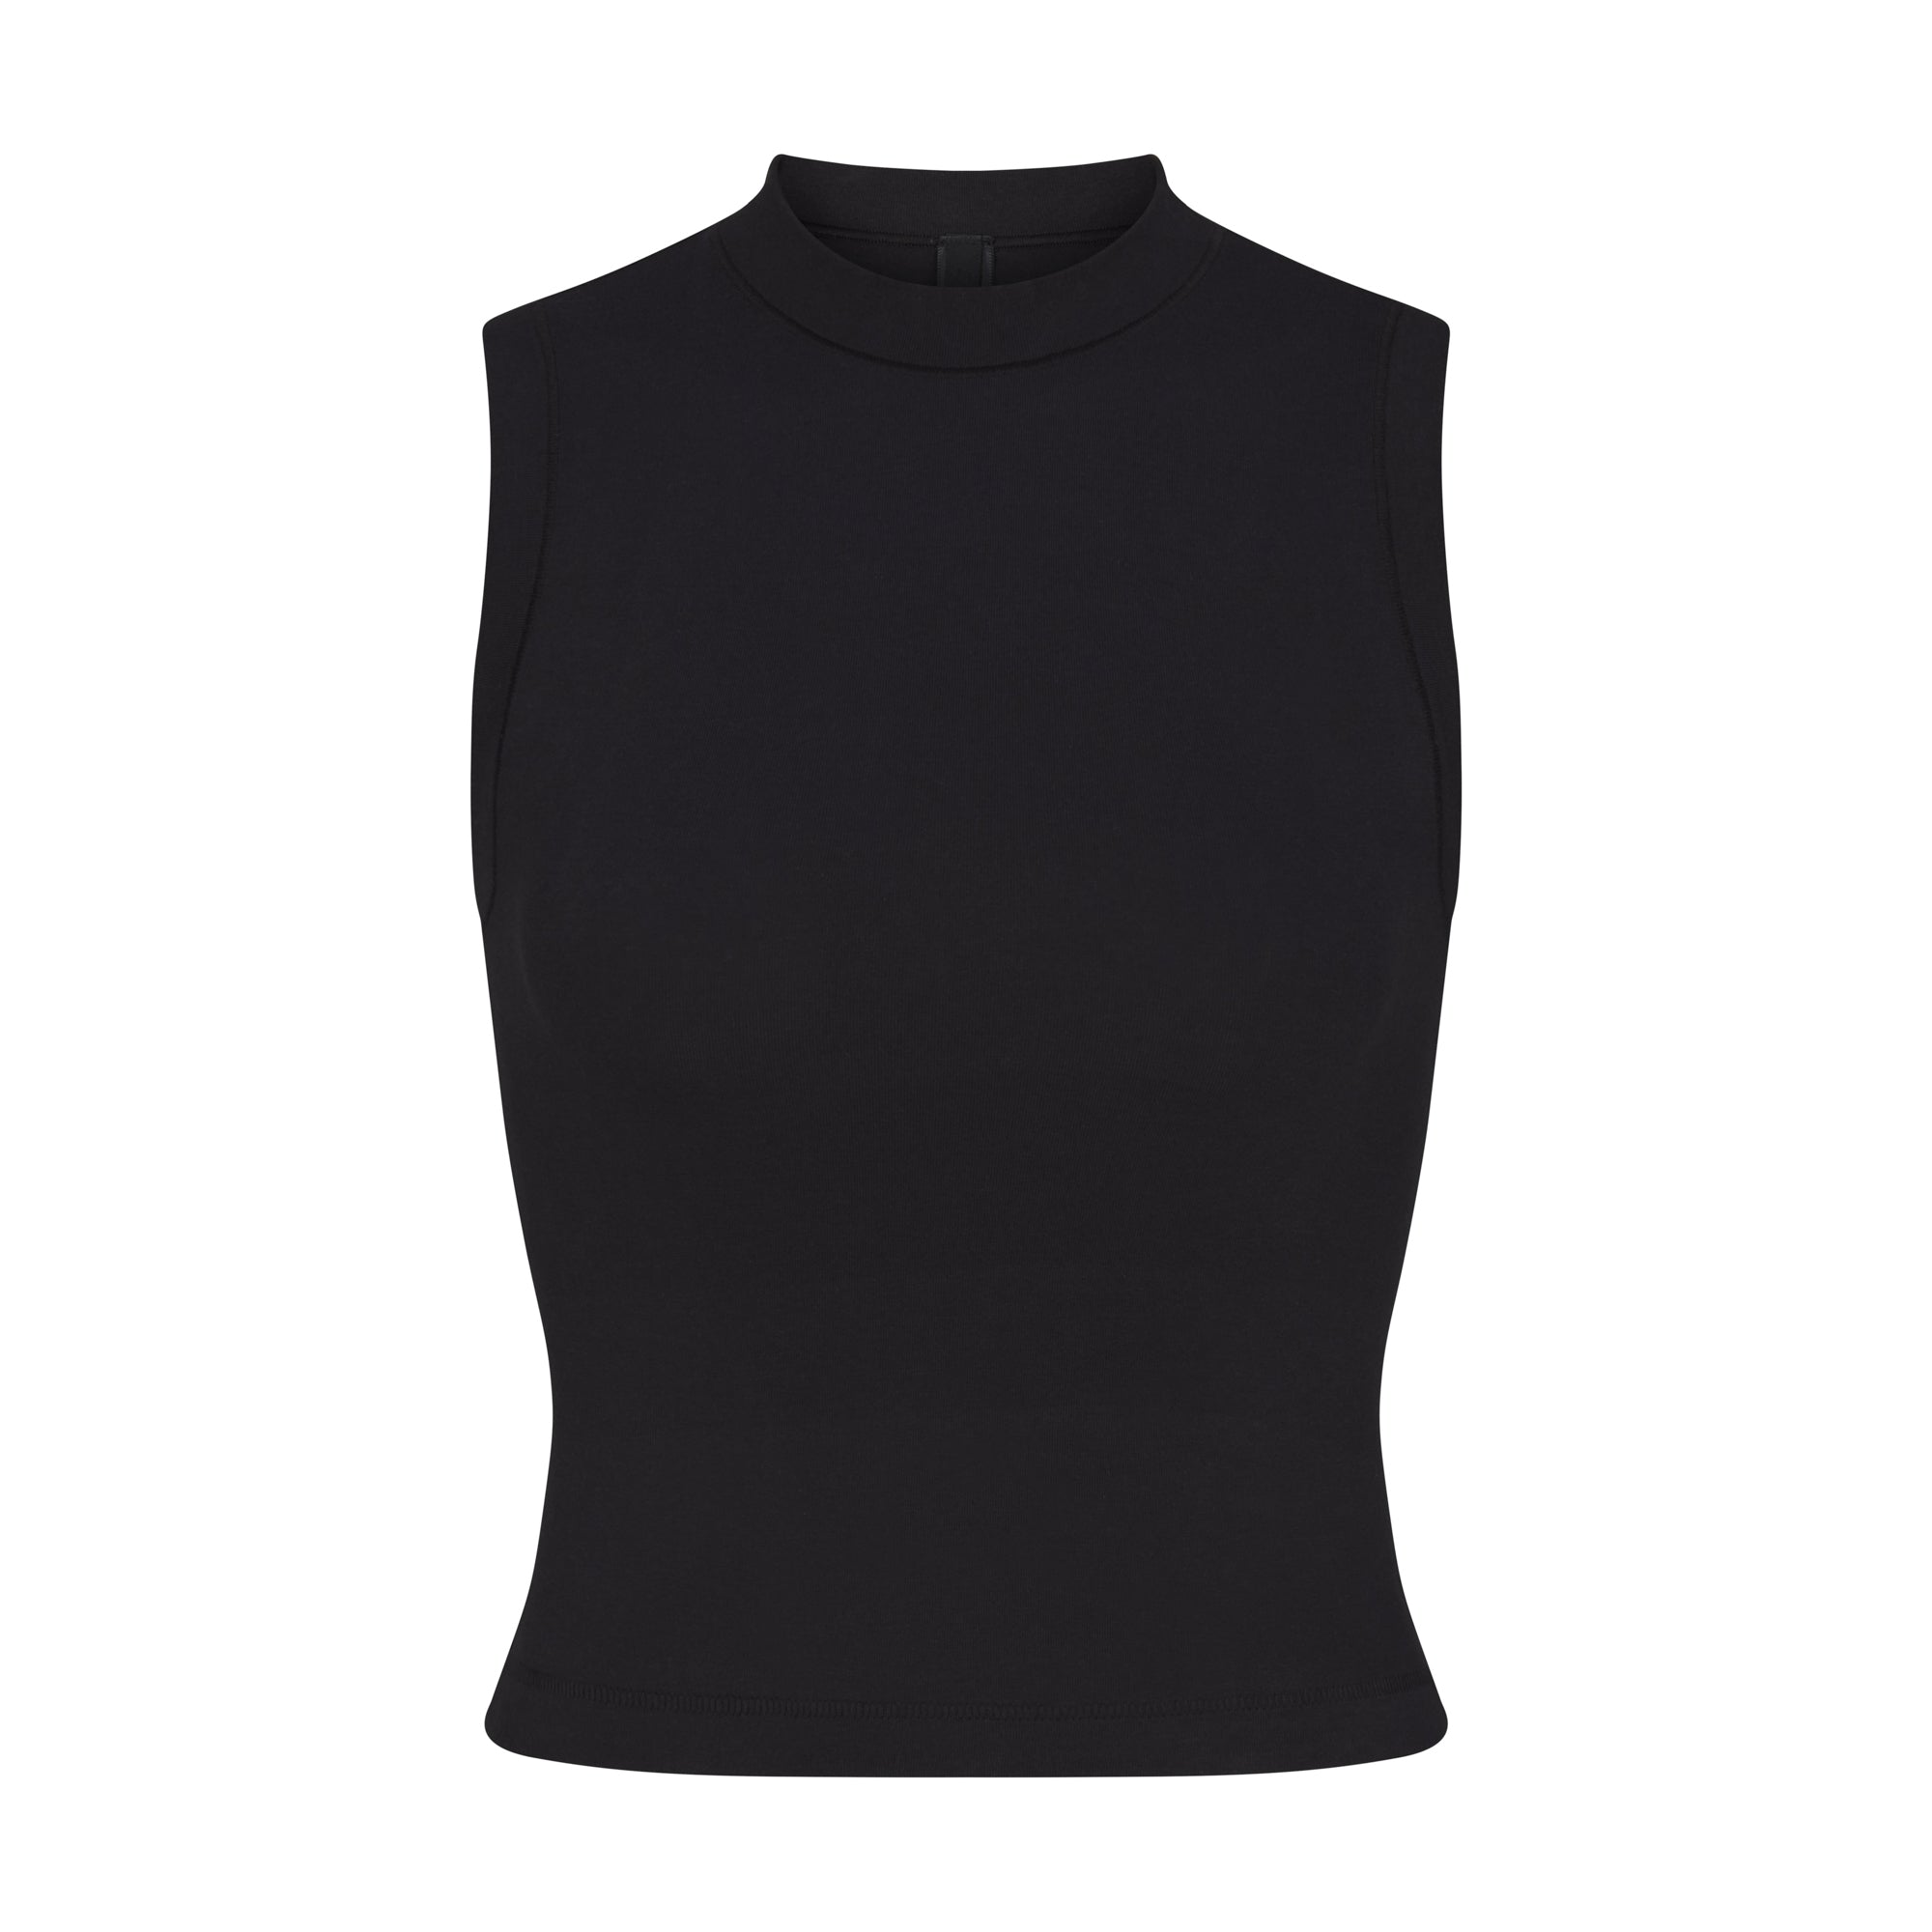 SKIMS - The soft and stretchy Cotton Jersey Mock Neck Tank, Dipped